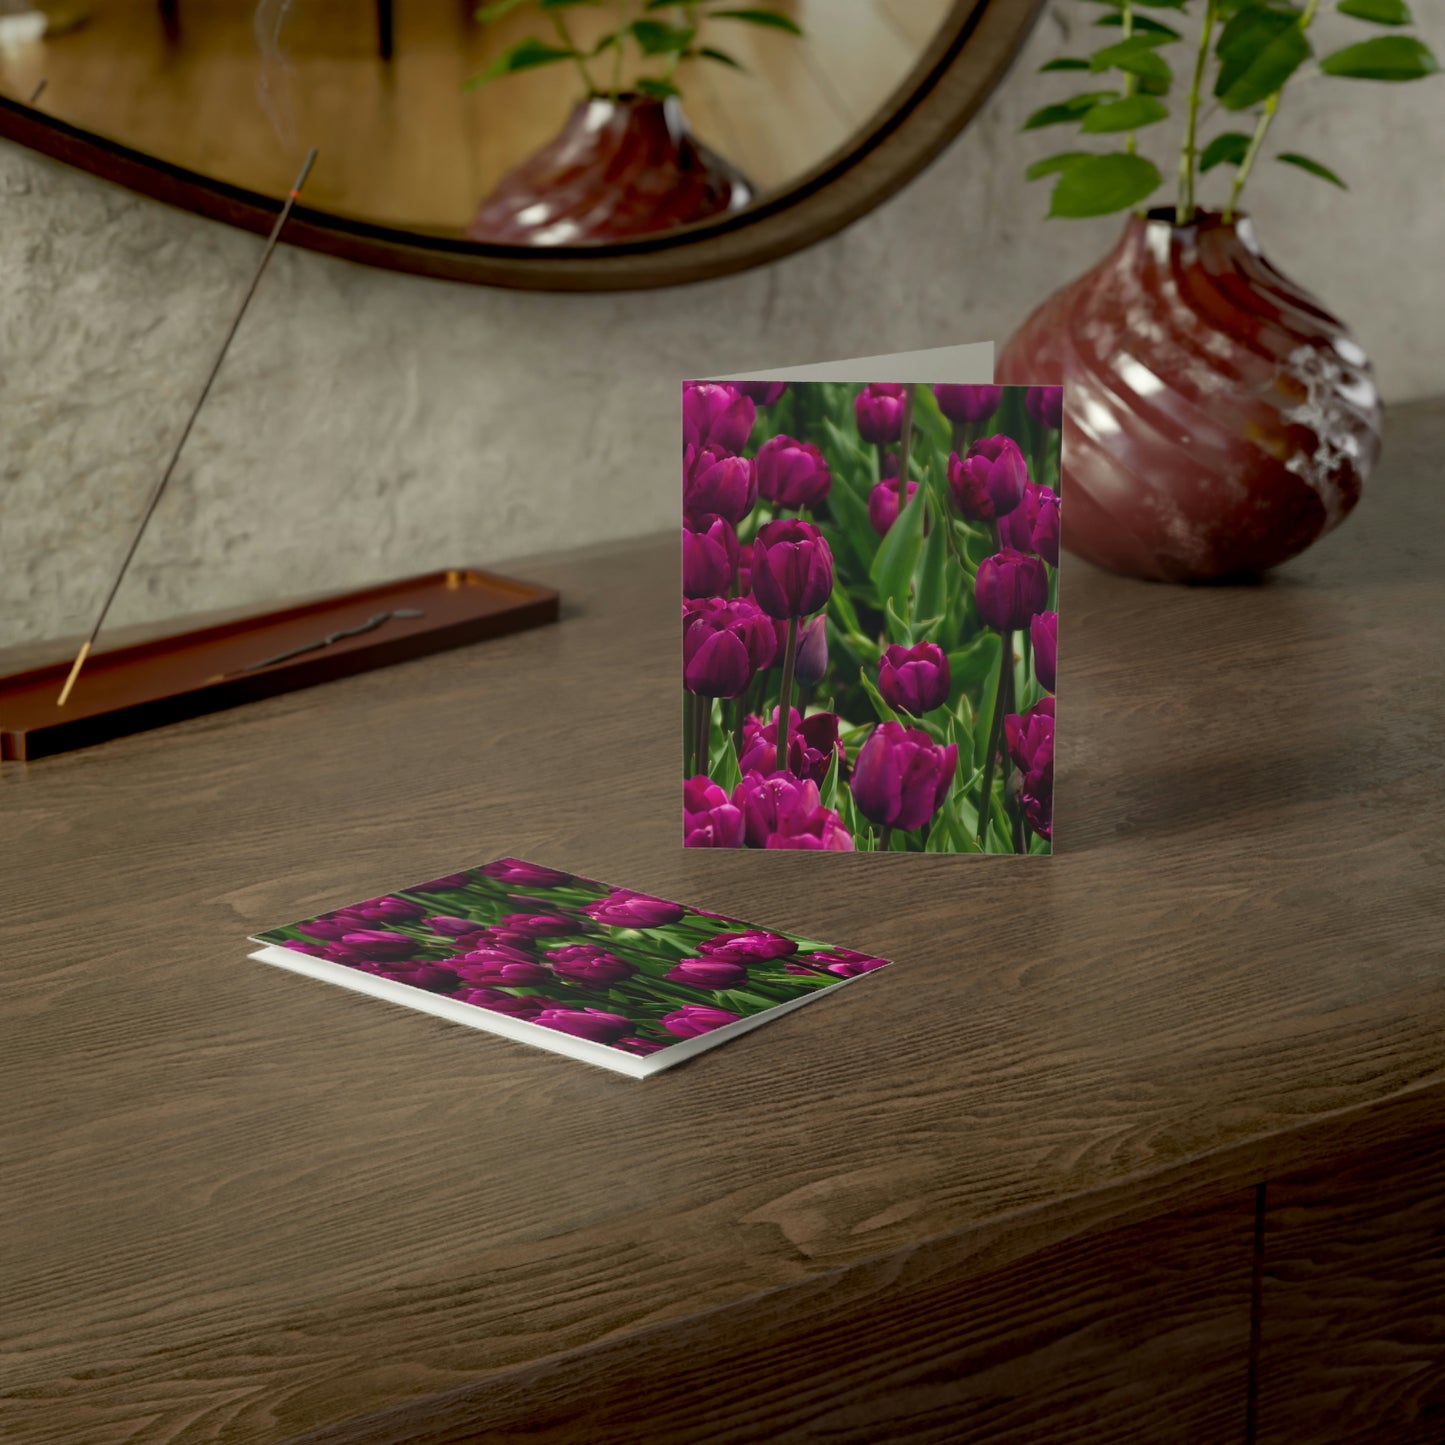 Flowers 20 Greeting Cards (1, 10, 30, and 50pcs)